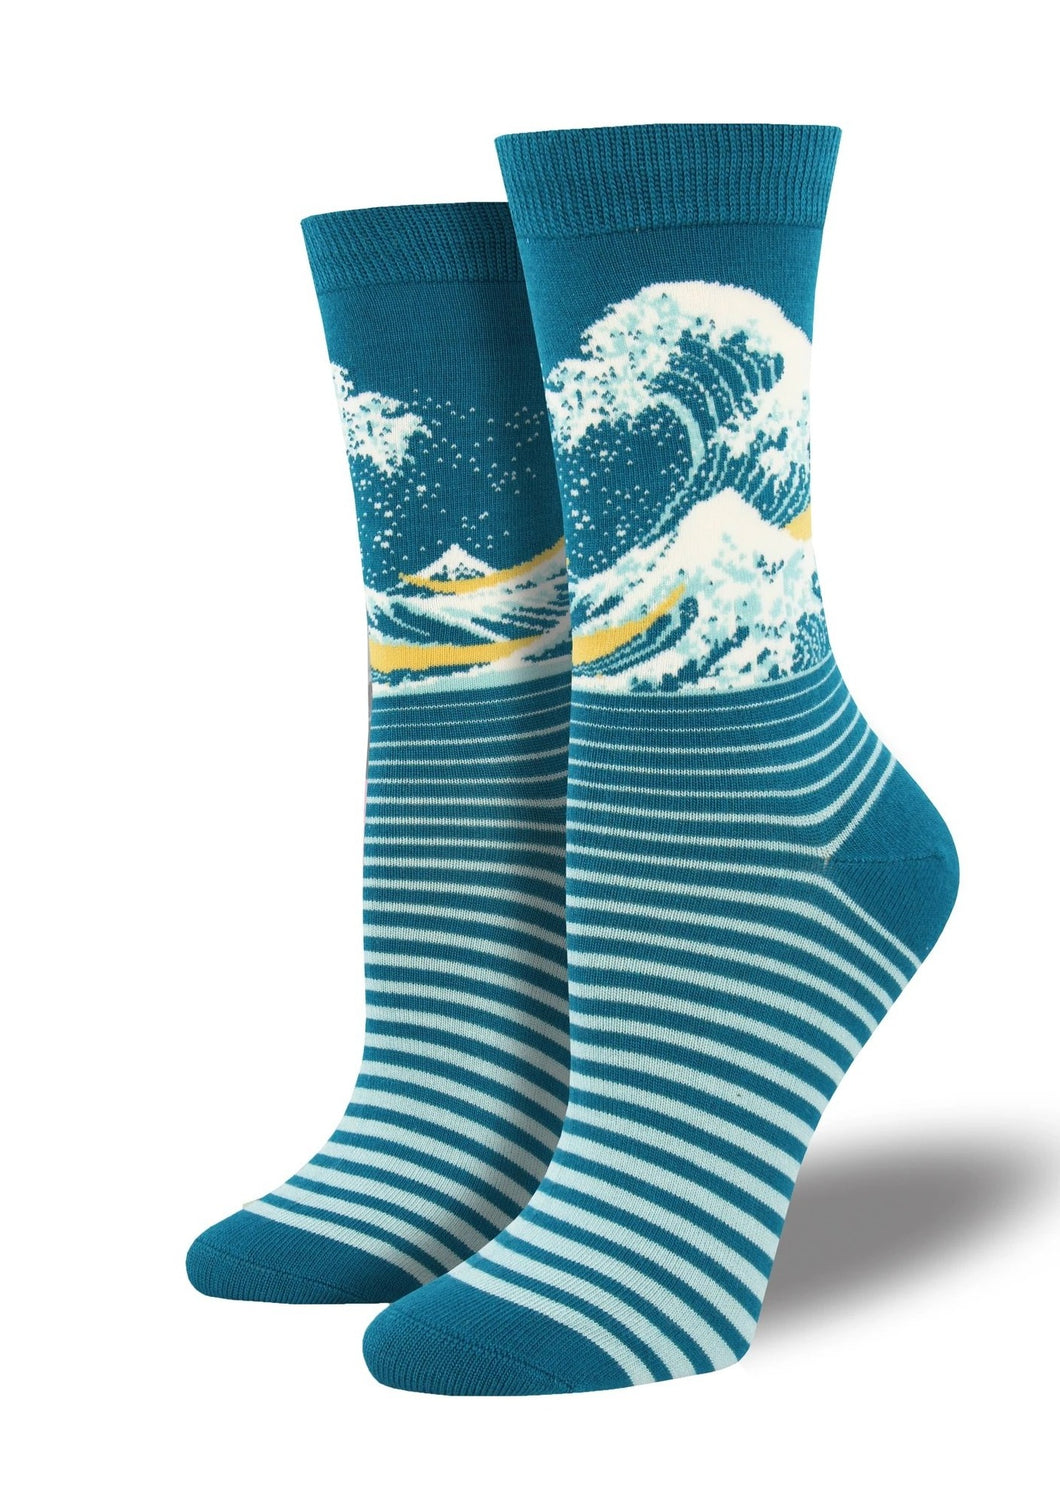 Blue With Wave Scene. Soft, Breathable, Moisture Wicking, Antibacterial, Hypoallergenic, Amazing Socks! One Size Fits Most (Women's 5-11) Fabrication: 66% Rayon from Bamboo, 32% Nylon, 2% Spandex SockSmith $20.00